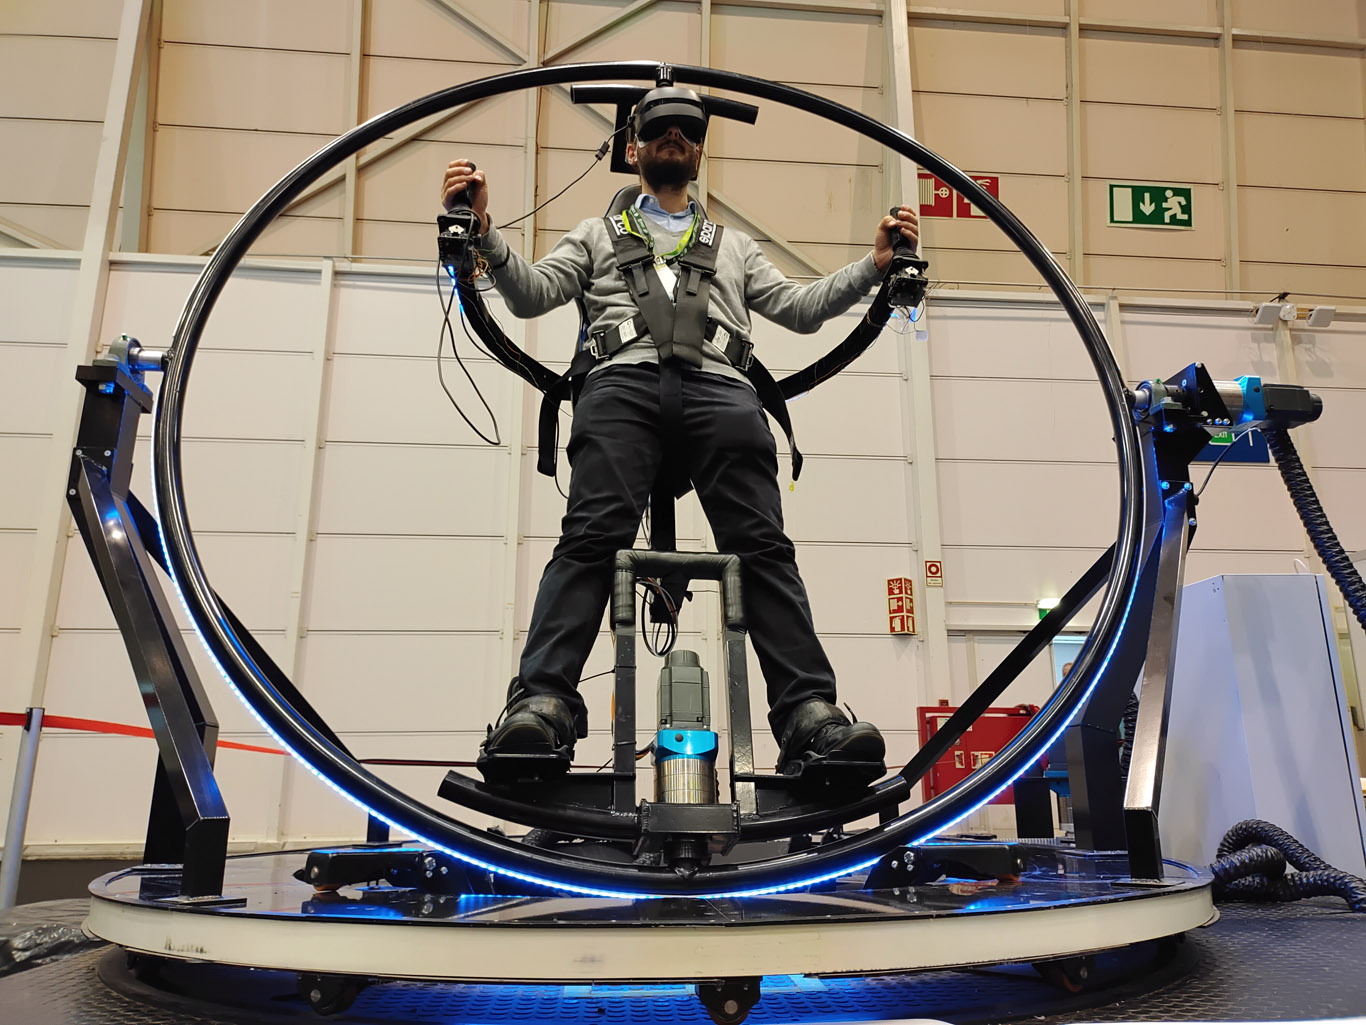 Vitruvian VR: a crazy and fun machine for flying in virtual reality